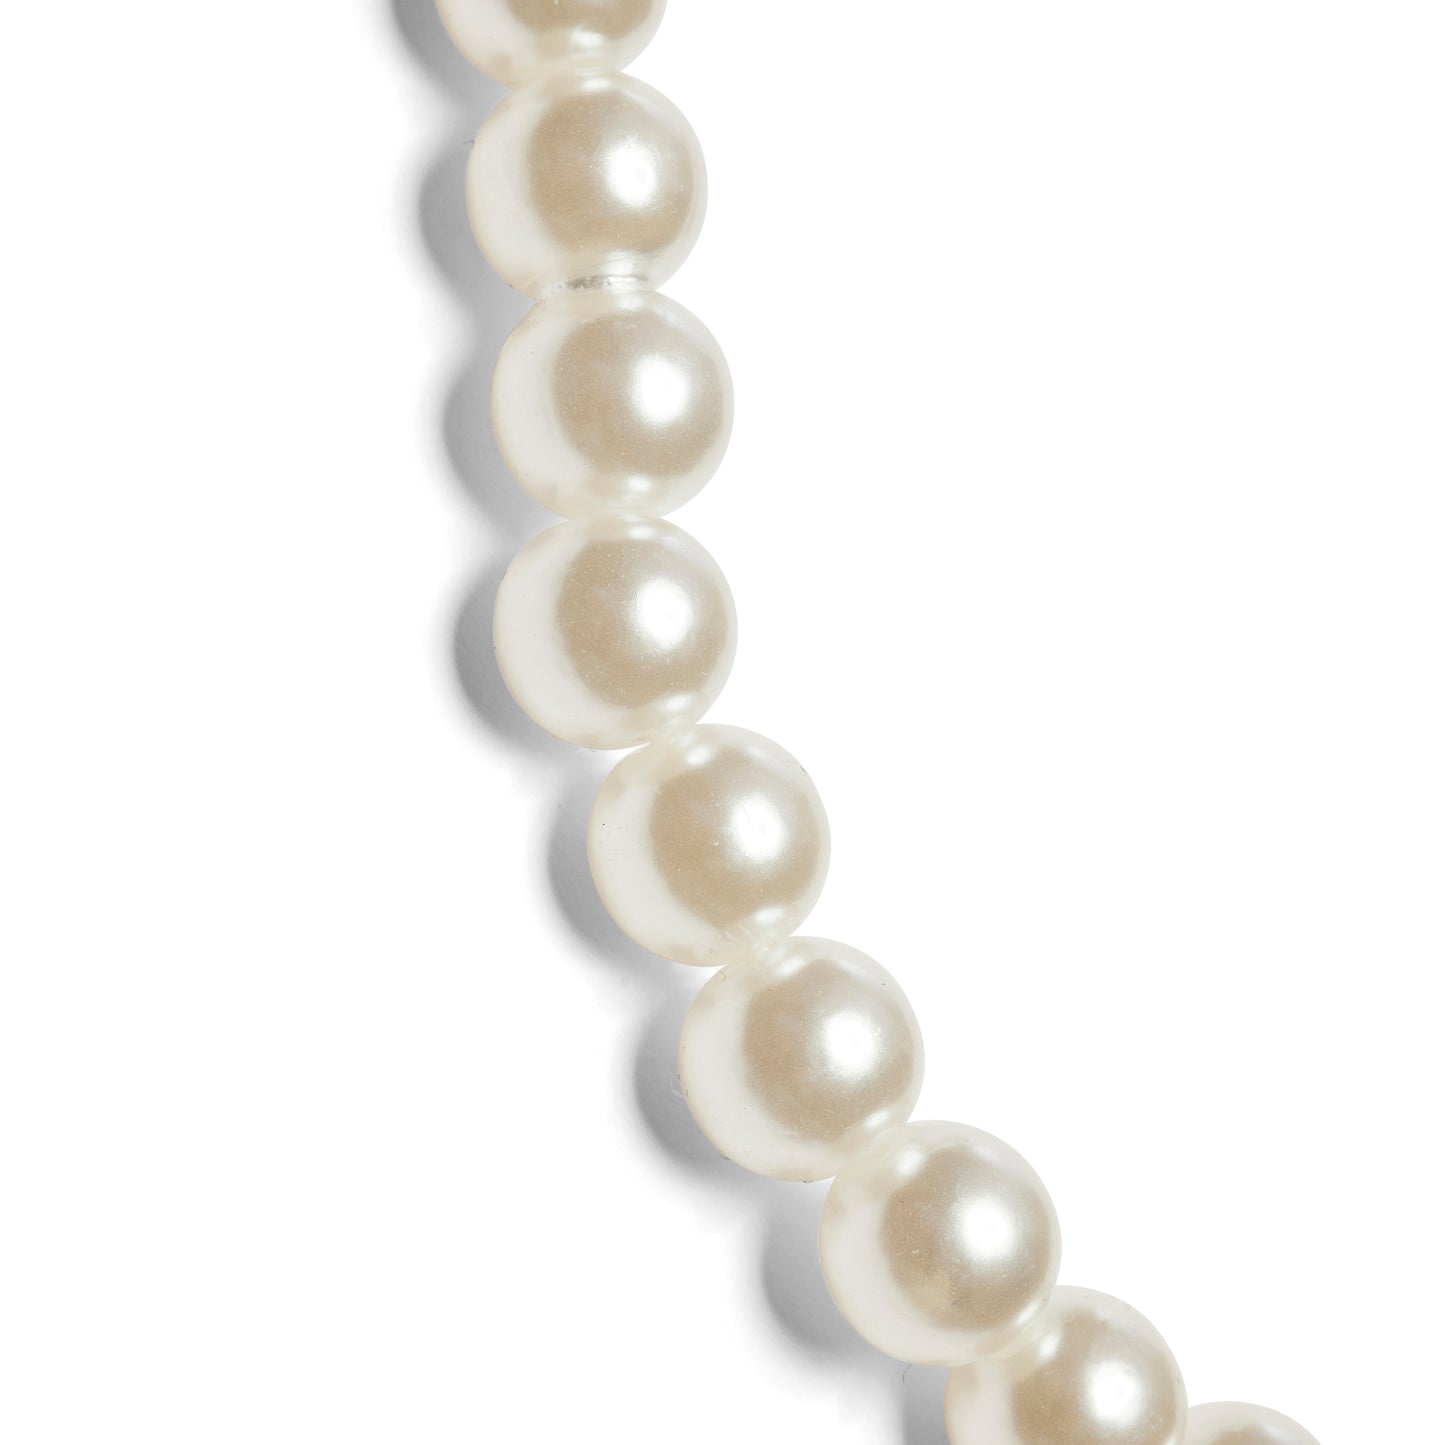 Starborn Pearl Necklace